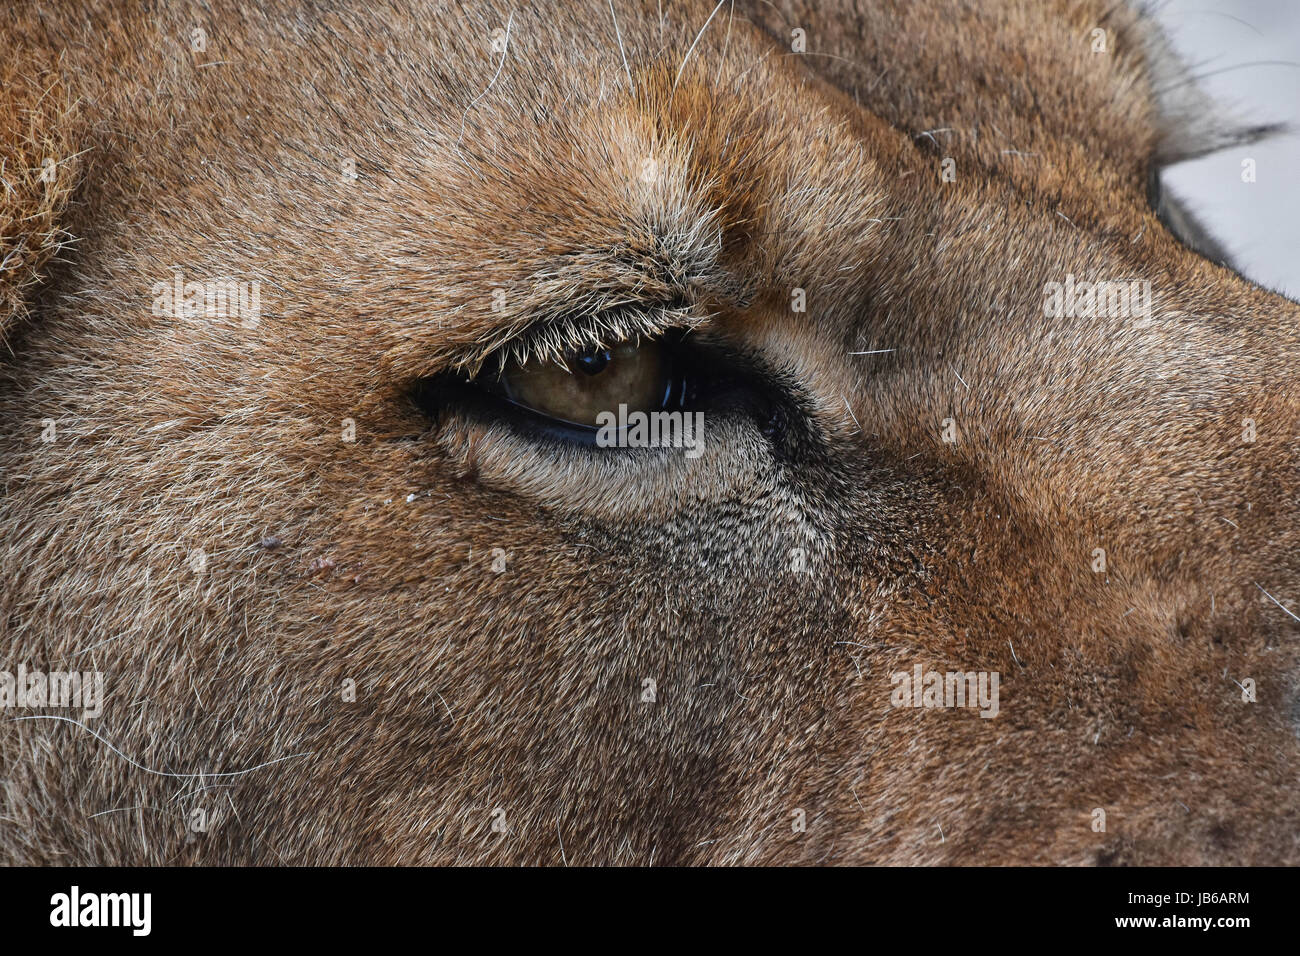 Extreme detailed close up profile portrait of female African lioness eye looking away Stock Photo